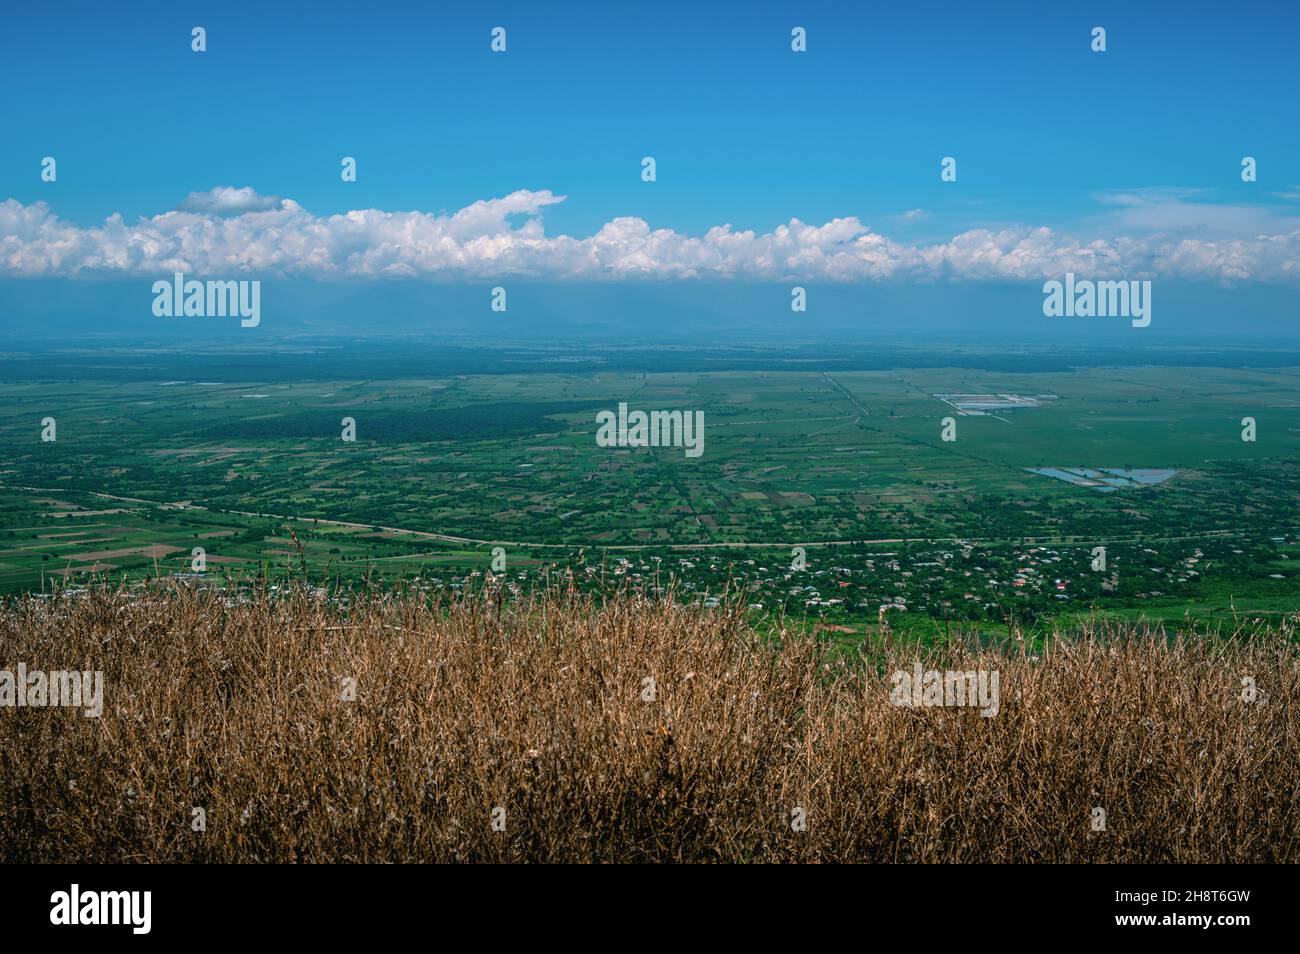 Scenic view of everlasting fields against cloudy skies in the town of Signagi. Kakheti Province, Georgia. Stock Photo